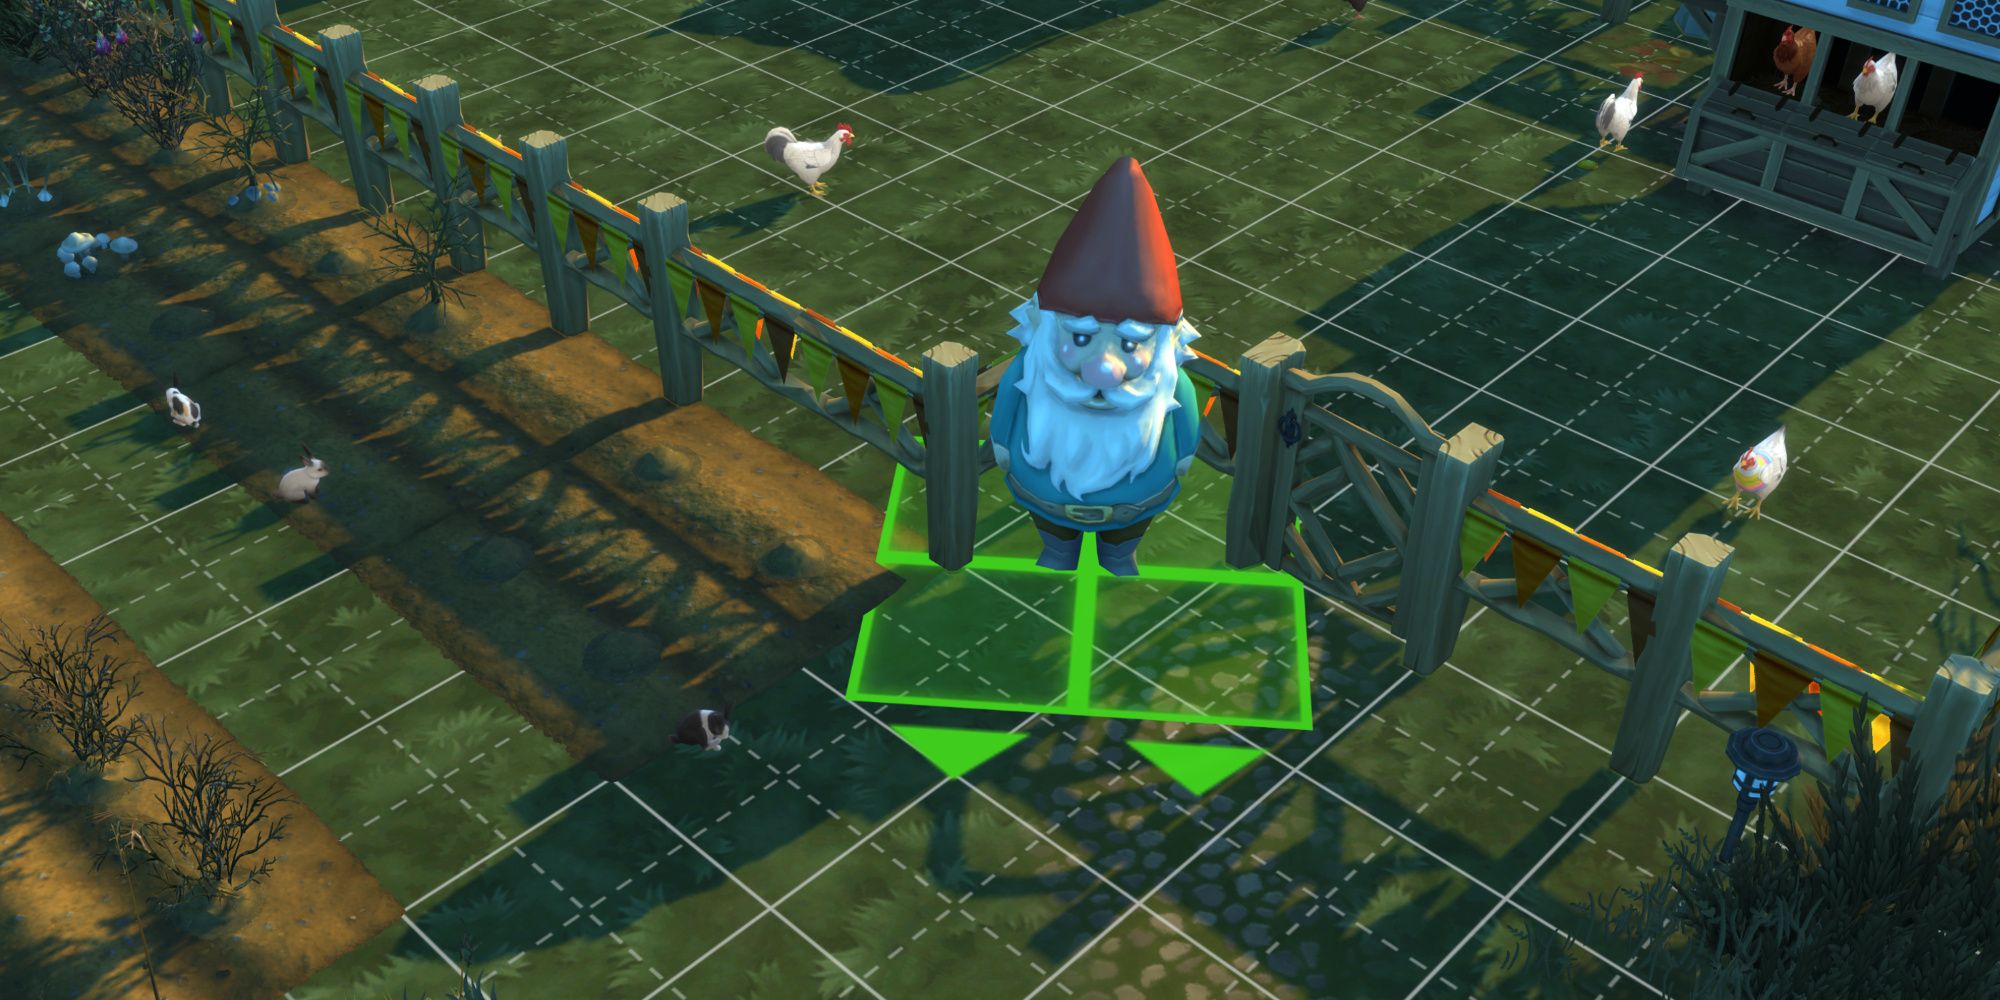 A gnome sized up beyond its normal size in The Sims 4